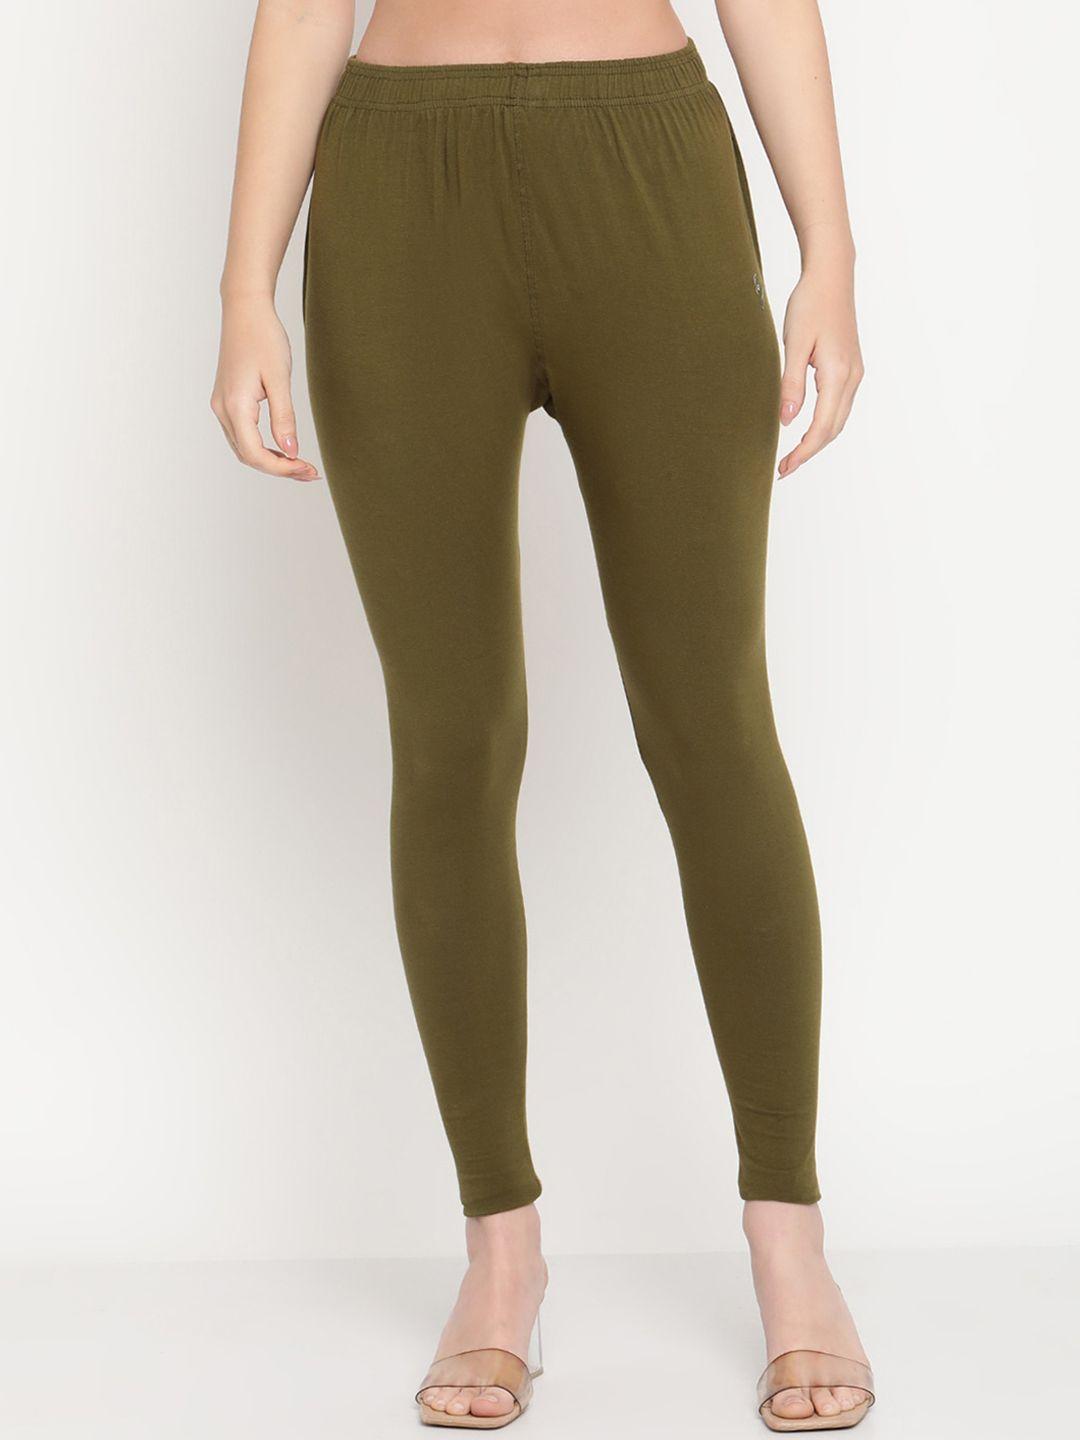 tag 7 women olive green women solid comfort fit ankle-length cotton leggings